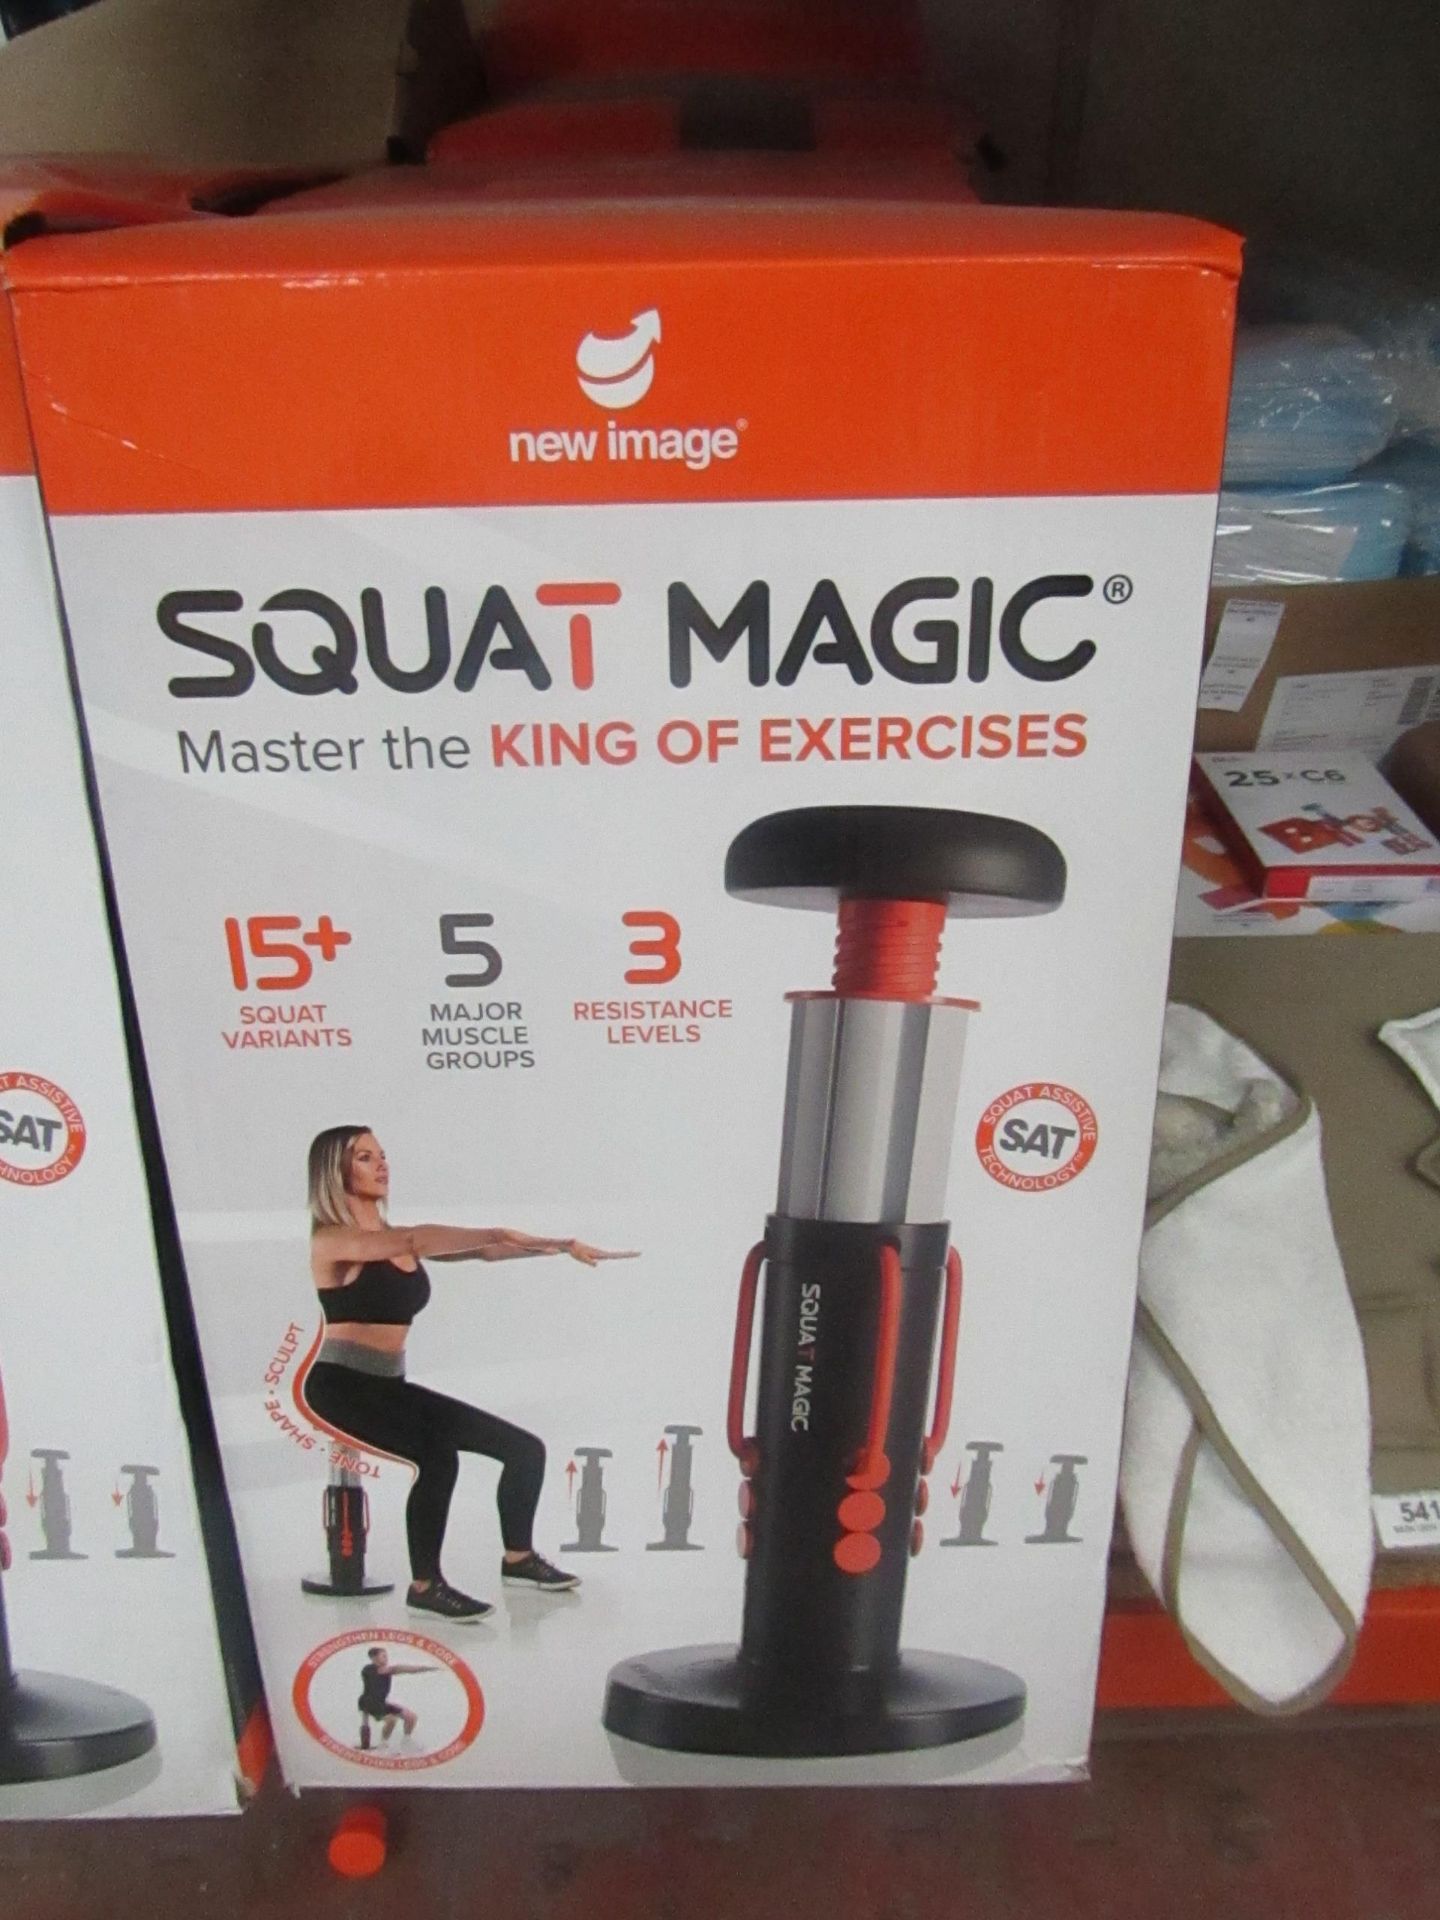 | 1X | NEW IMAGE SQUAT MAGIC | UNCHECKED & BOXED | NO ONLINE RESALE | SKU C5060191467513 | RRP £49.